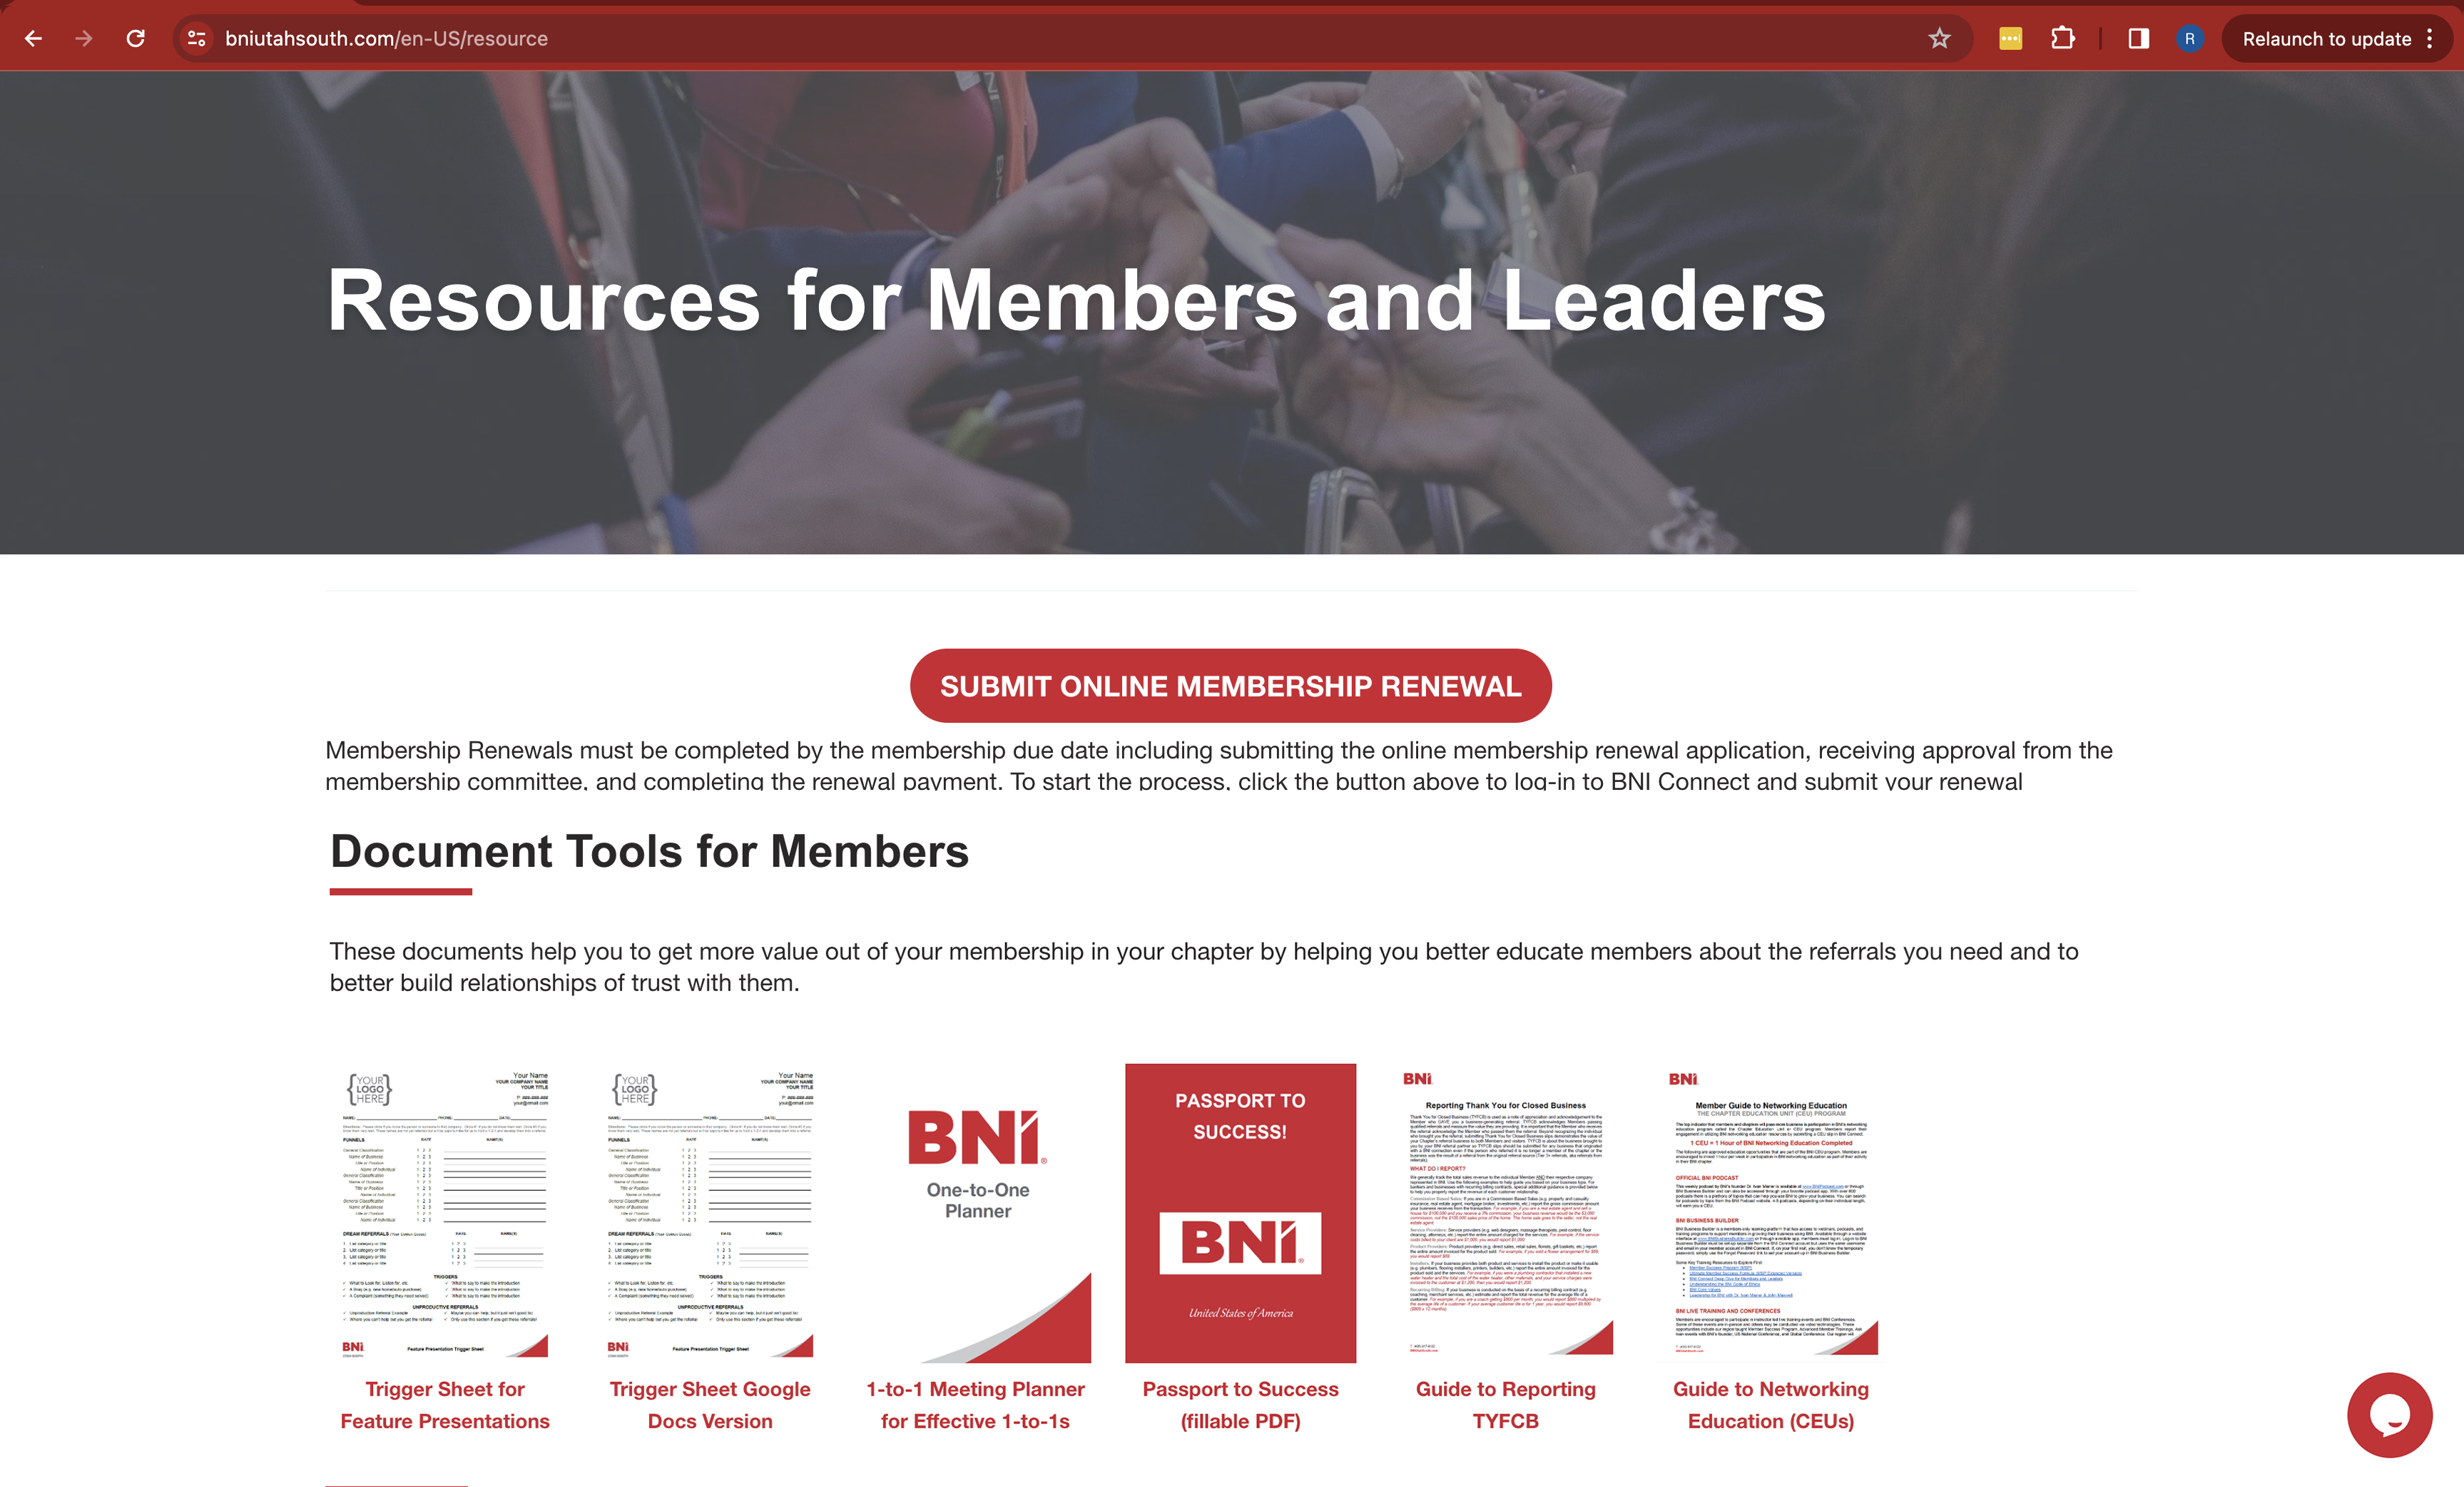 Resources Web Page for Members - Key Documents and Info for Your Success